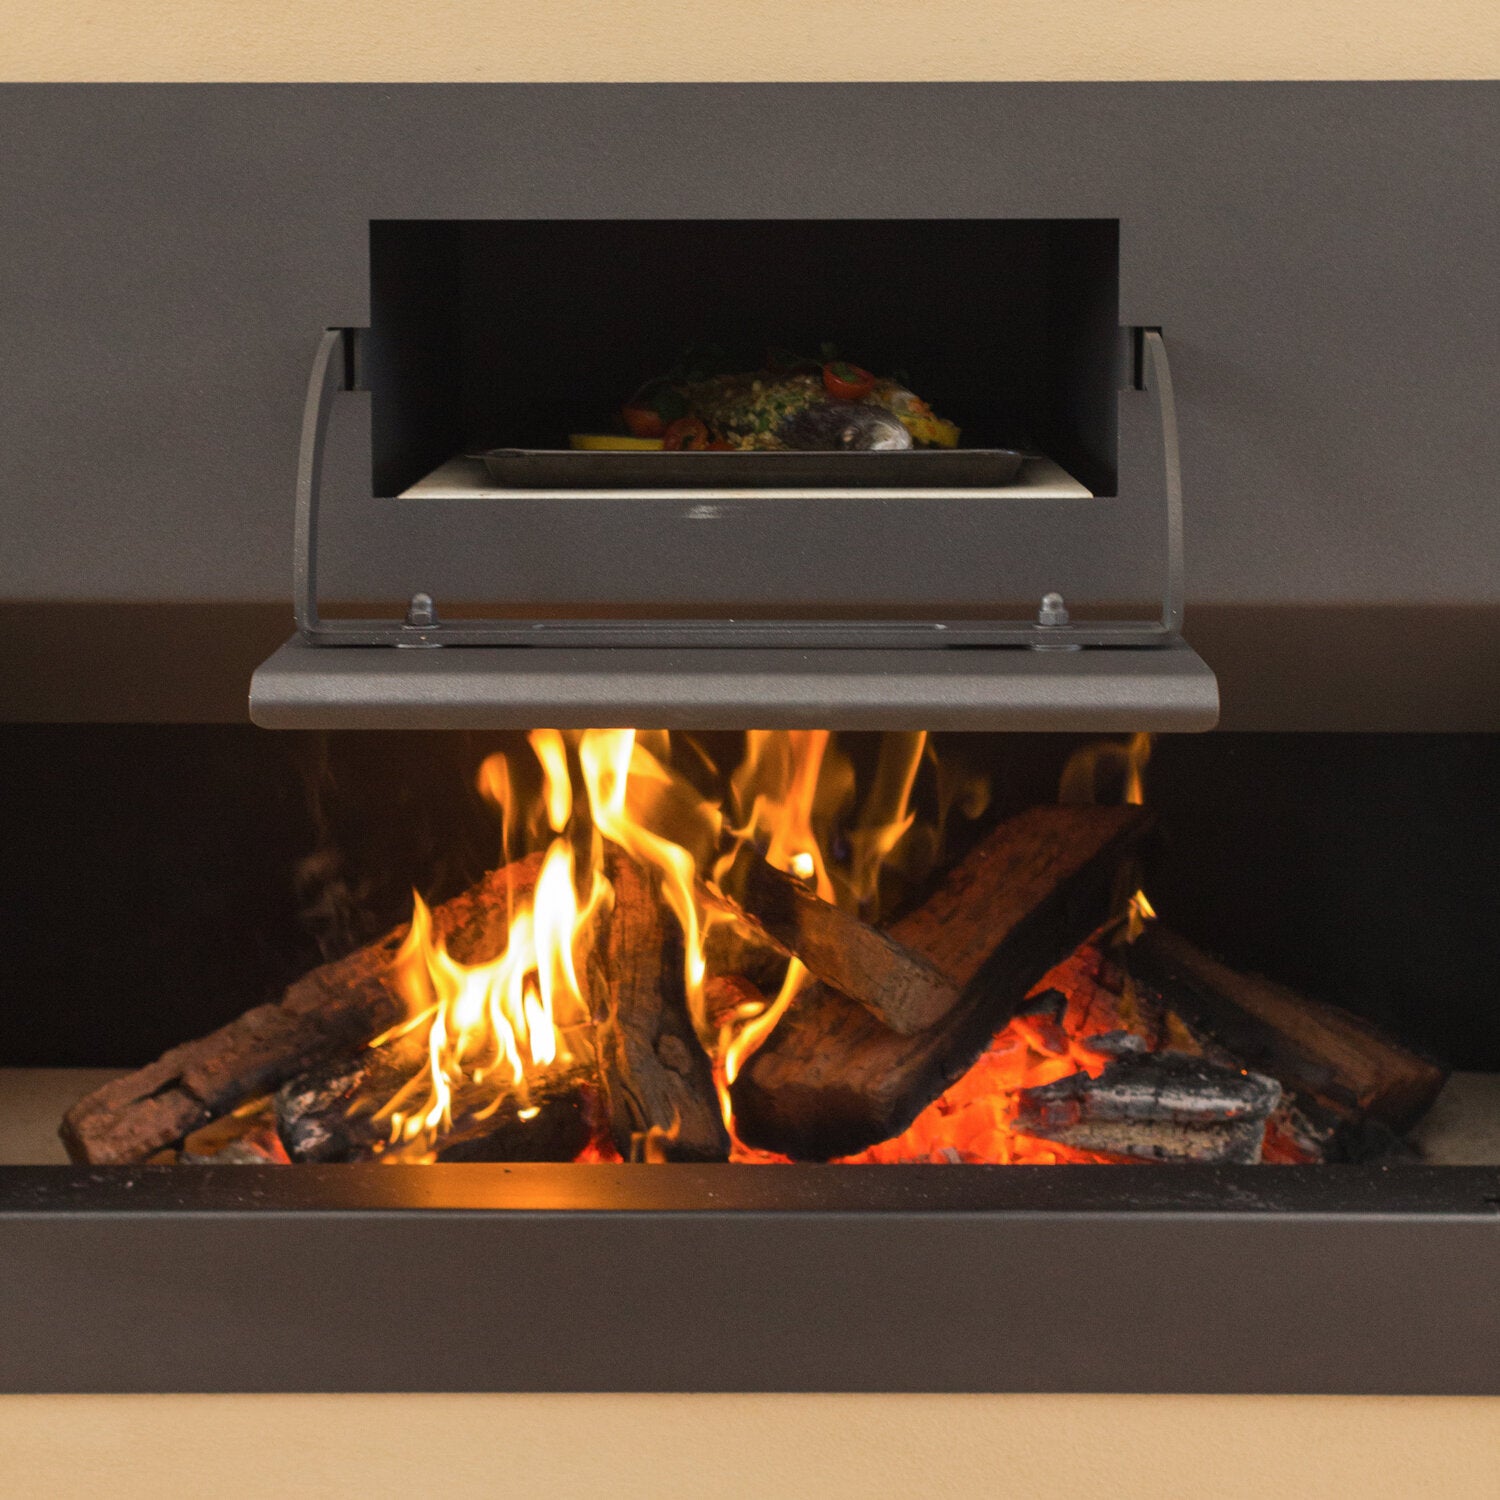 Oven with burning wood - The Woodfired Oven